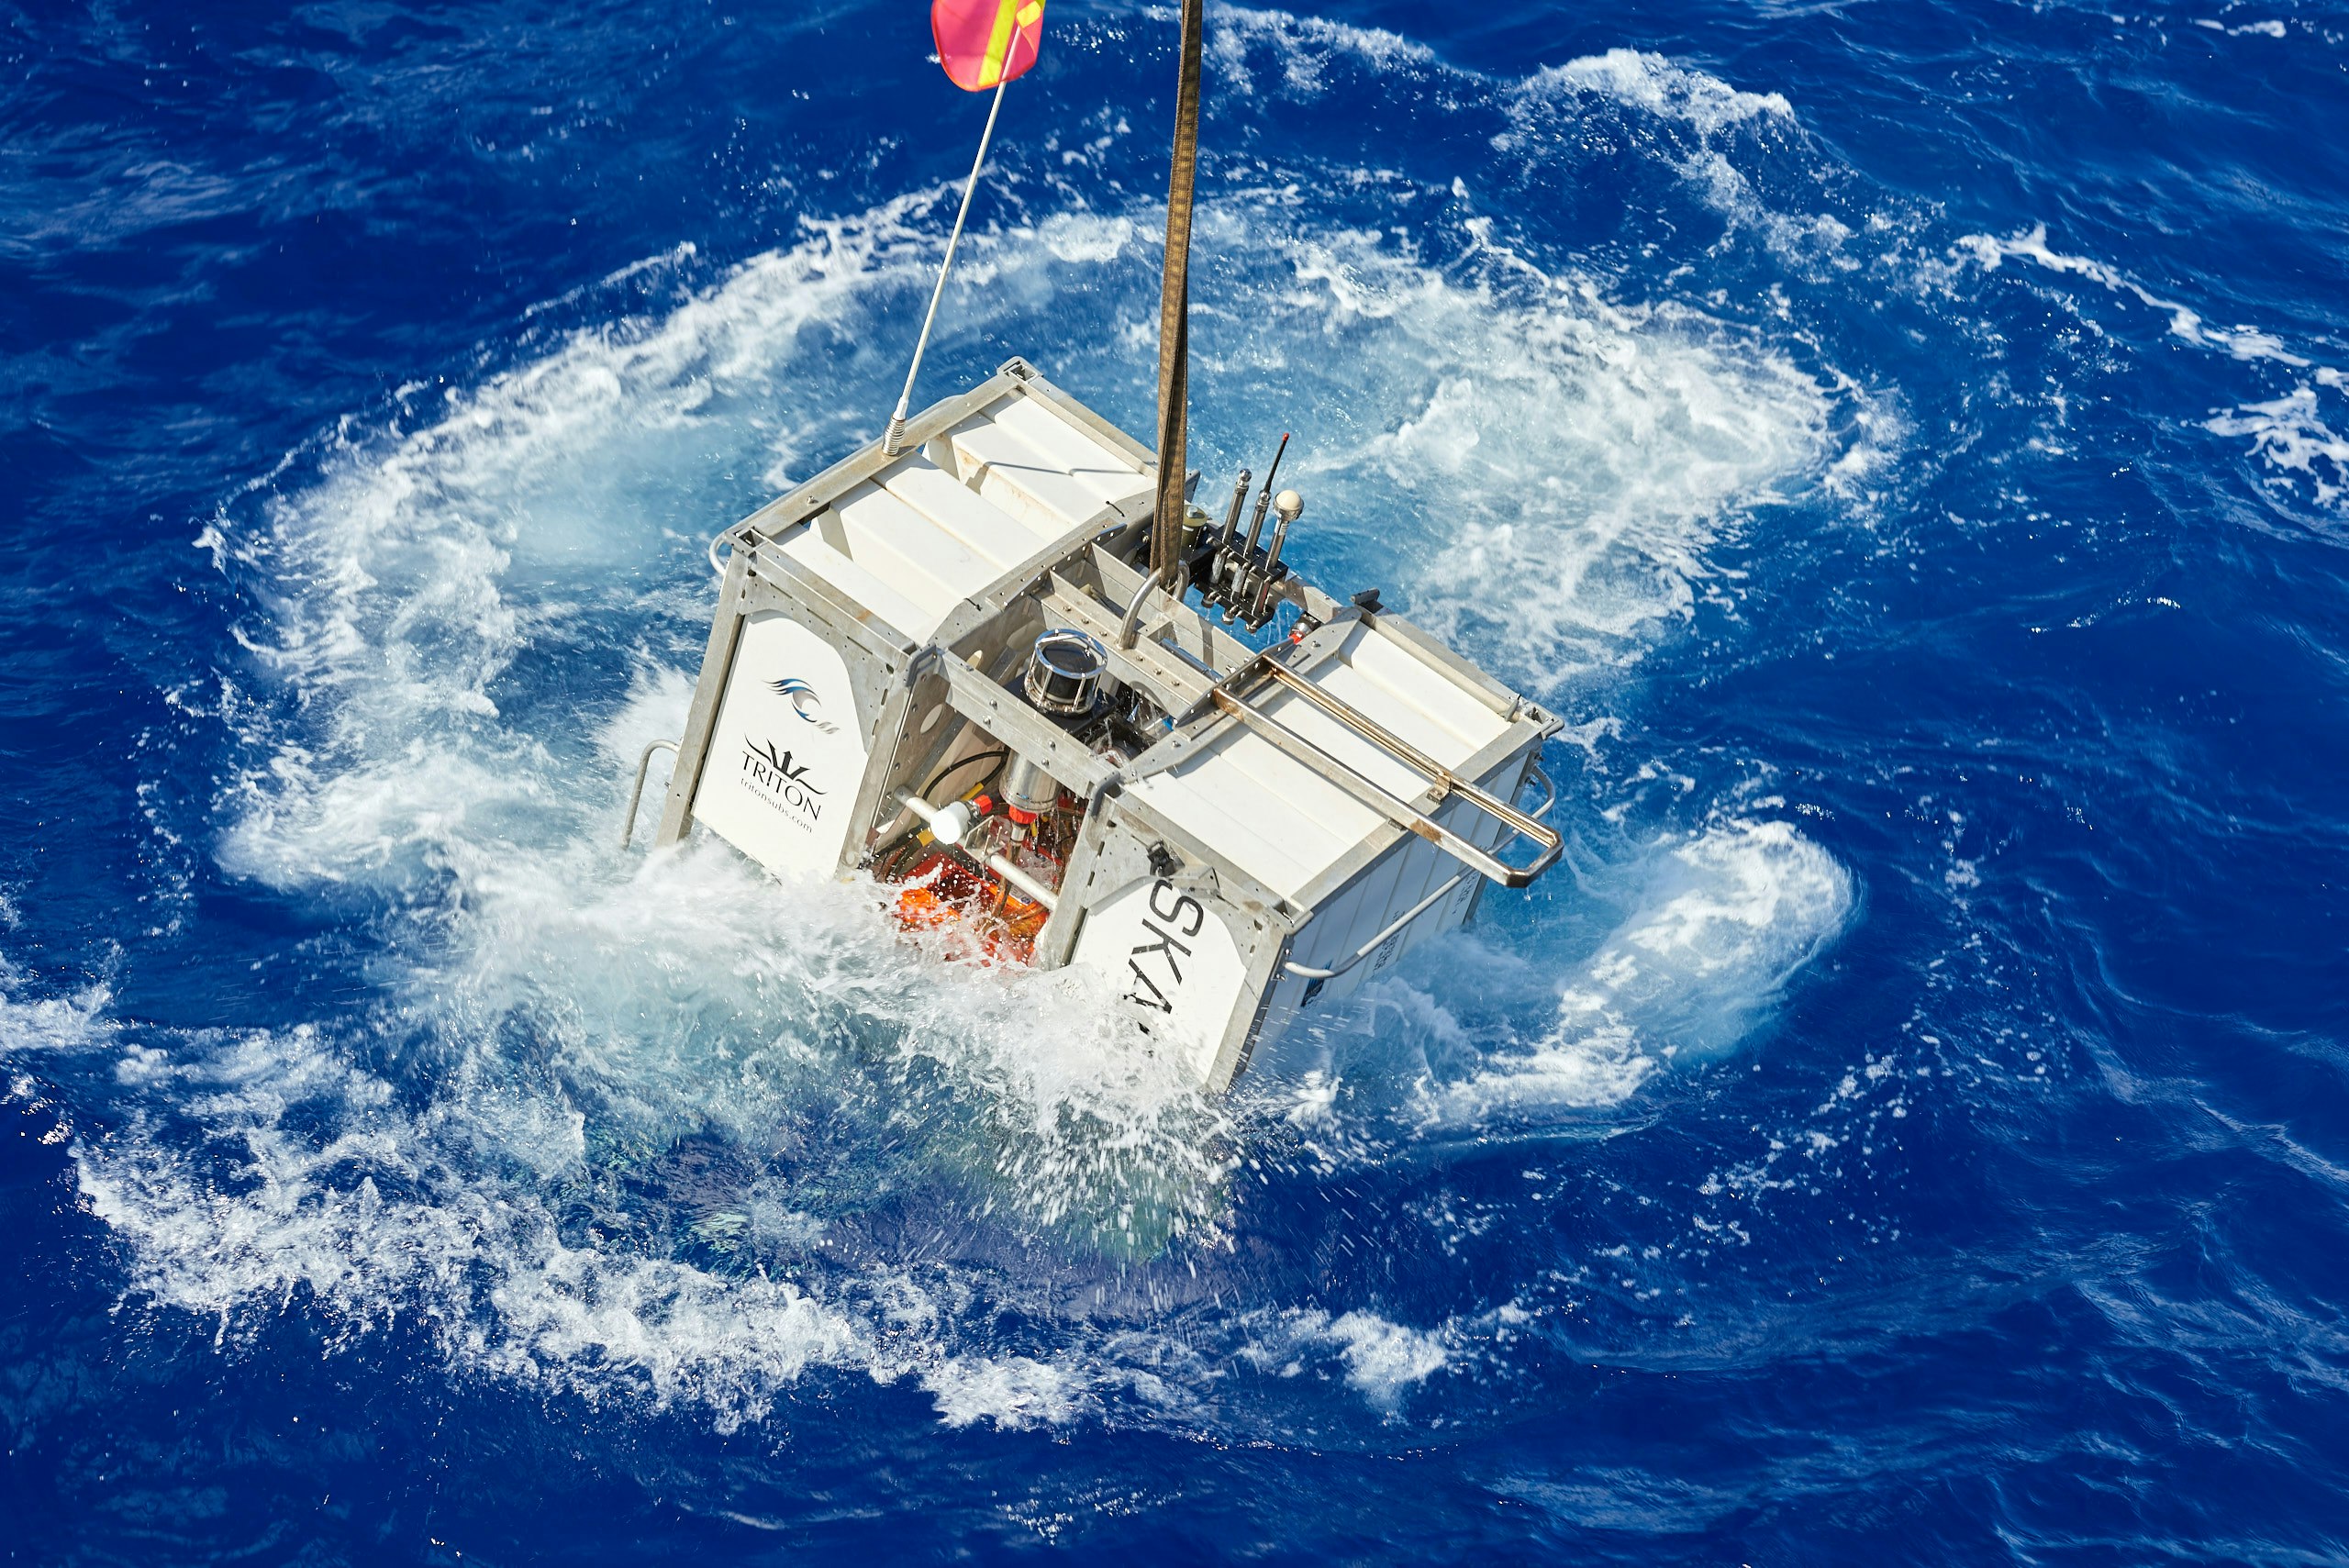 A picture of one of the landers launched before each dive